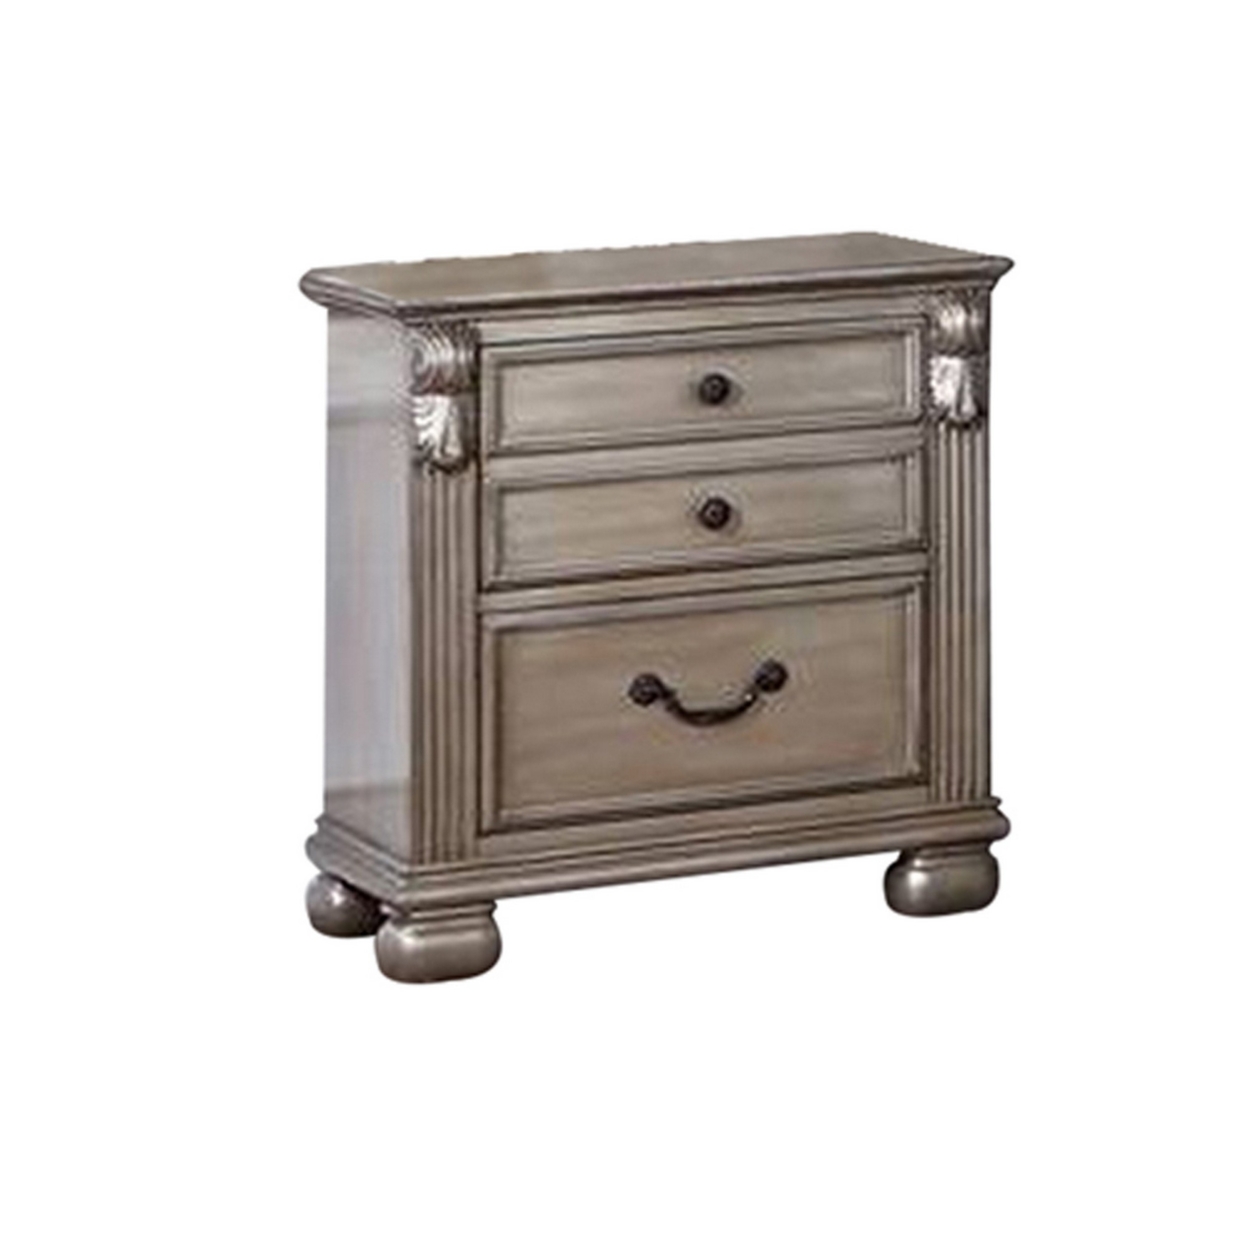 Aza 28 Inch Classic 3 Drawer Nightstand, Metal Drop Handles, Champagne Gold